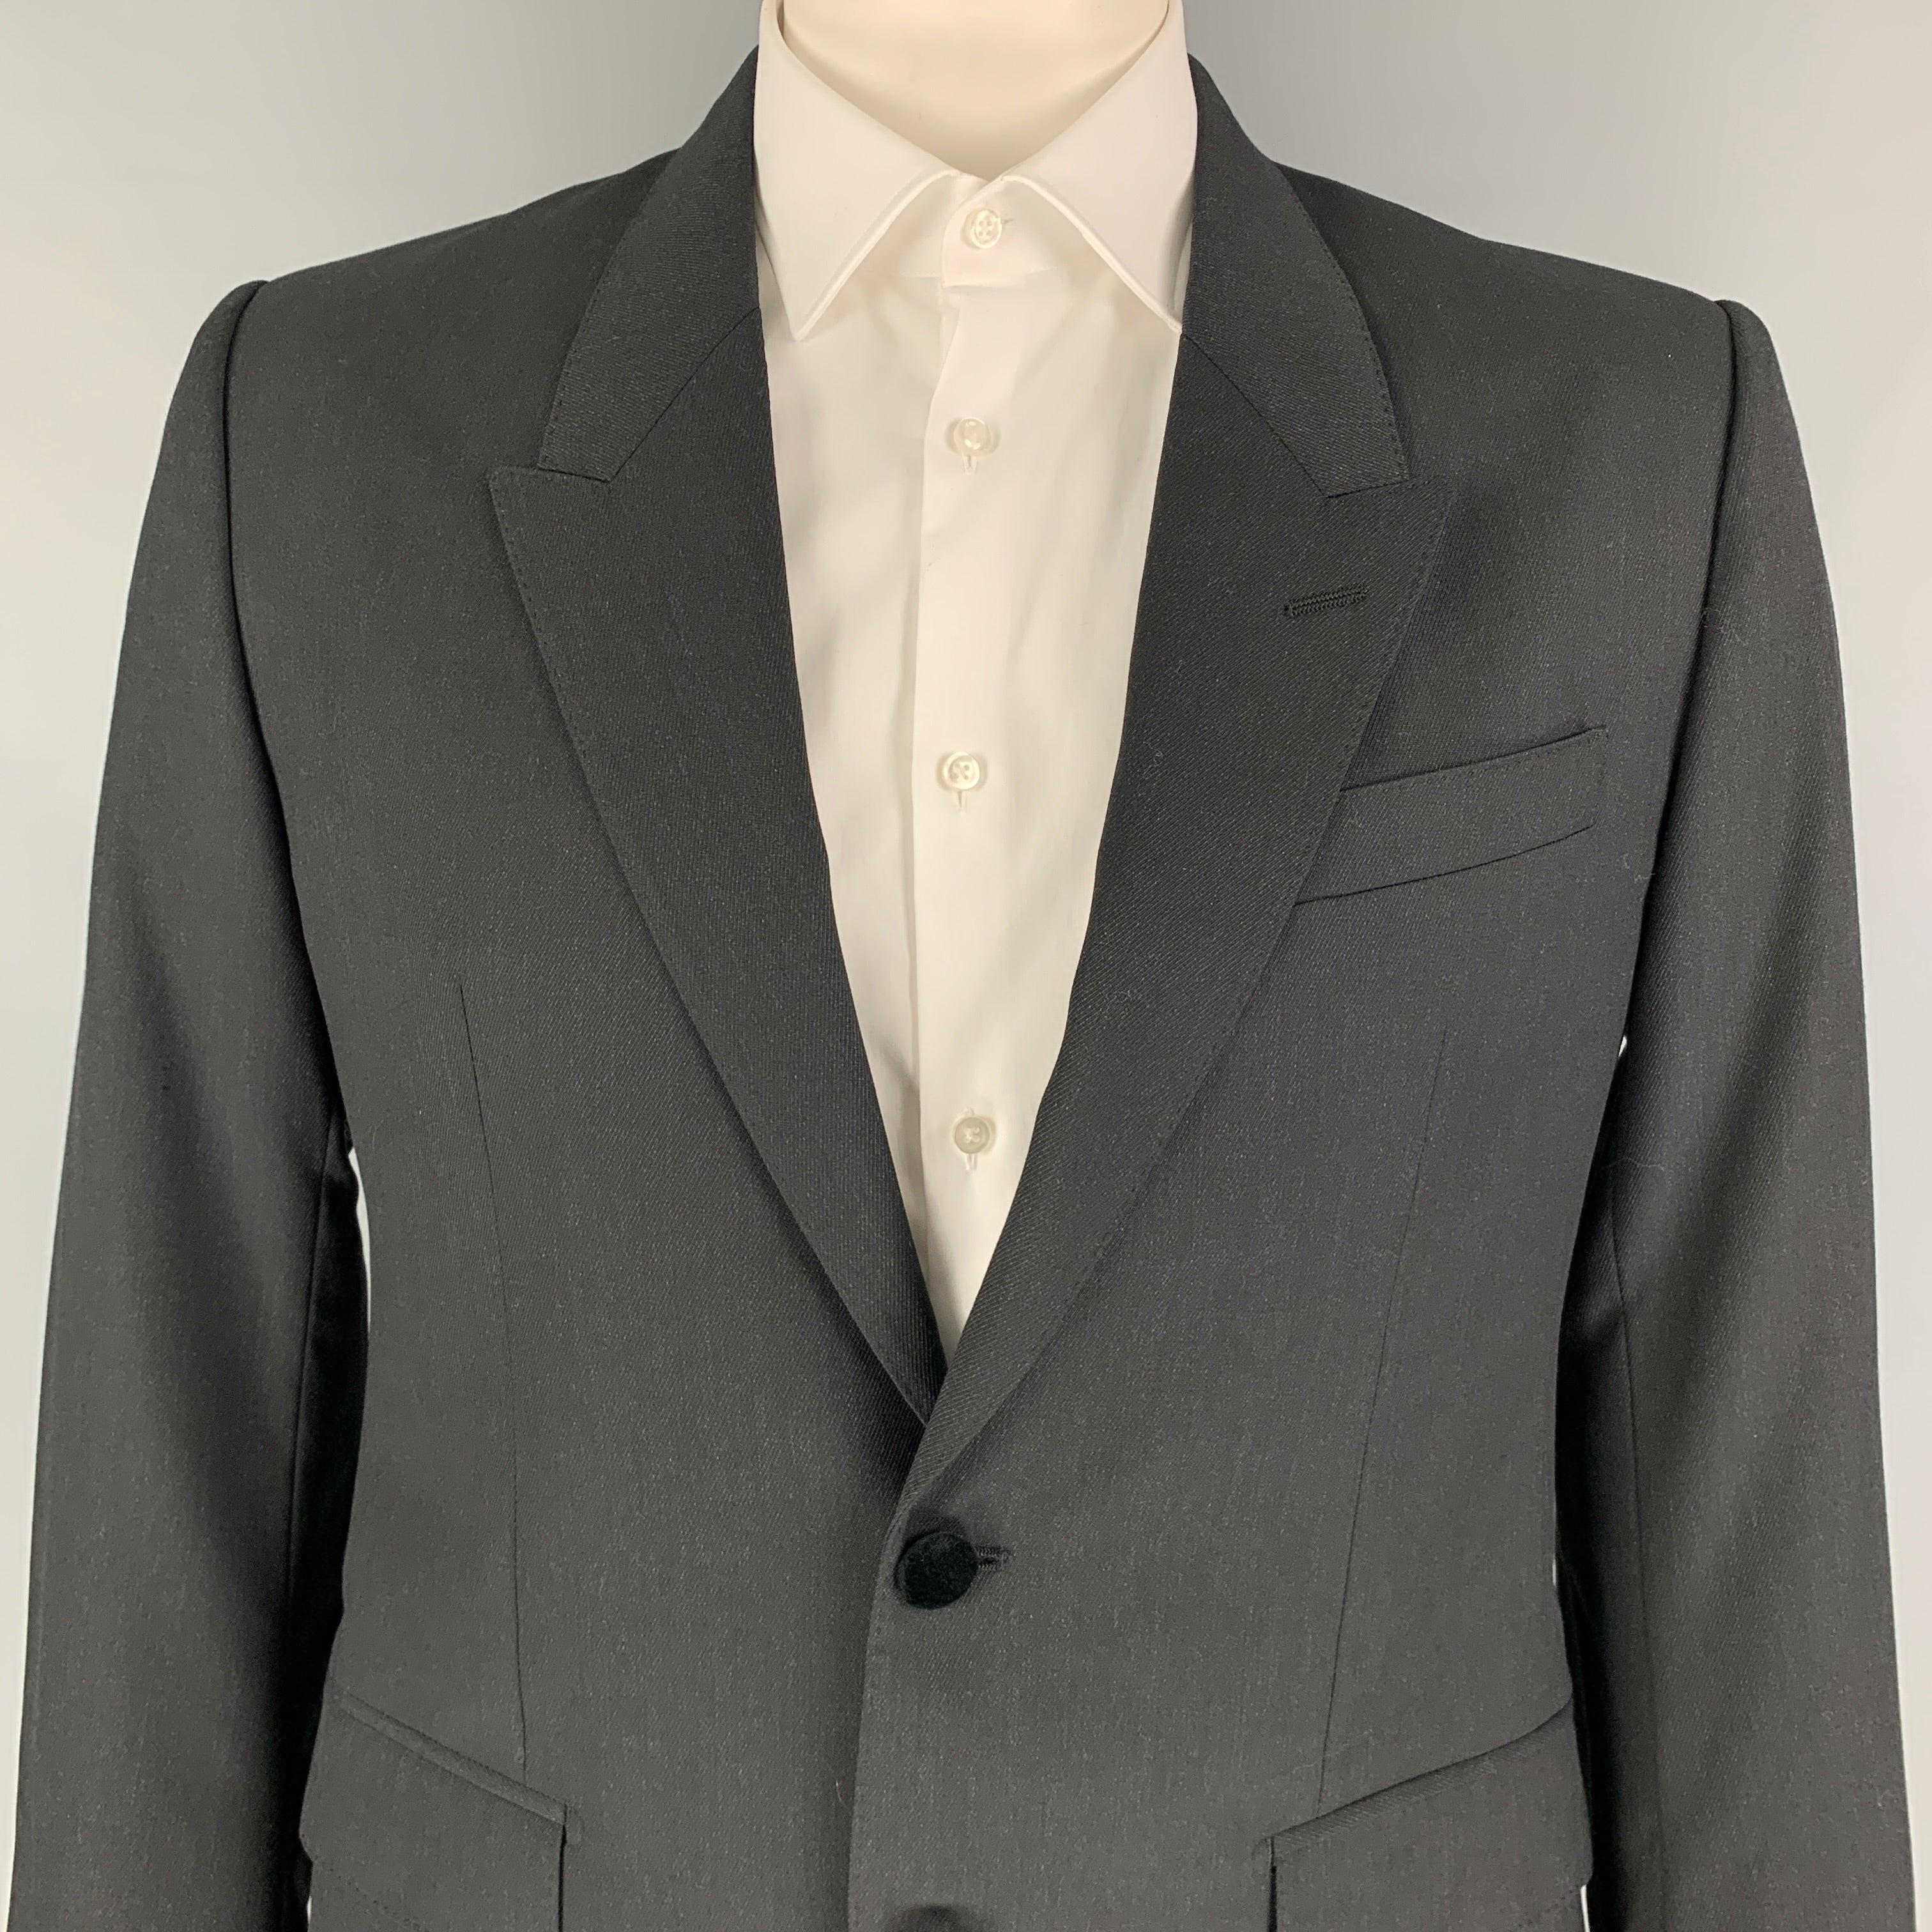 DOLCE & GABBANA sport coat comes in a charcoal wool with a full liner featuring a peak lapel, flap pockets, single back vent, and a double button closure. Made in Italy.
Very Good
Pre-Owned Condition. 

Marked:   52 

Measurements: 
 
Shoulder: 18